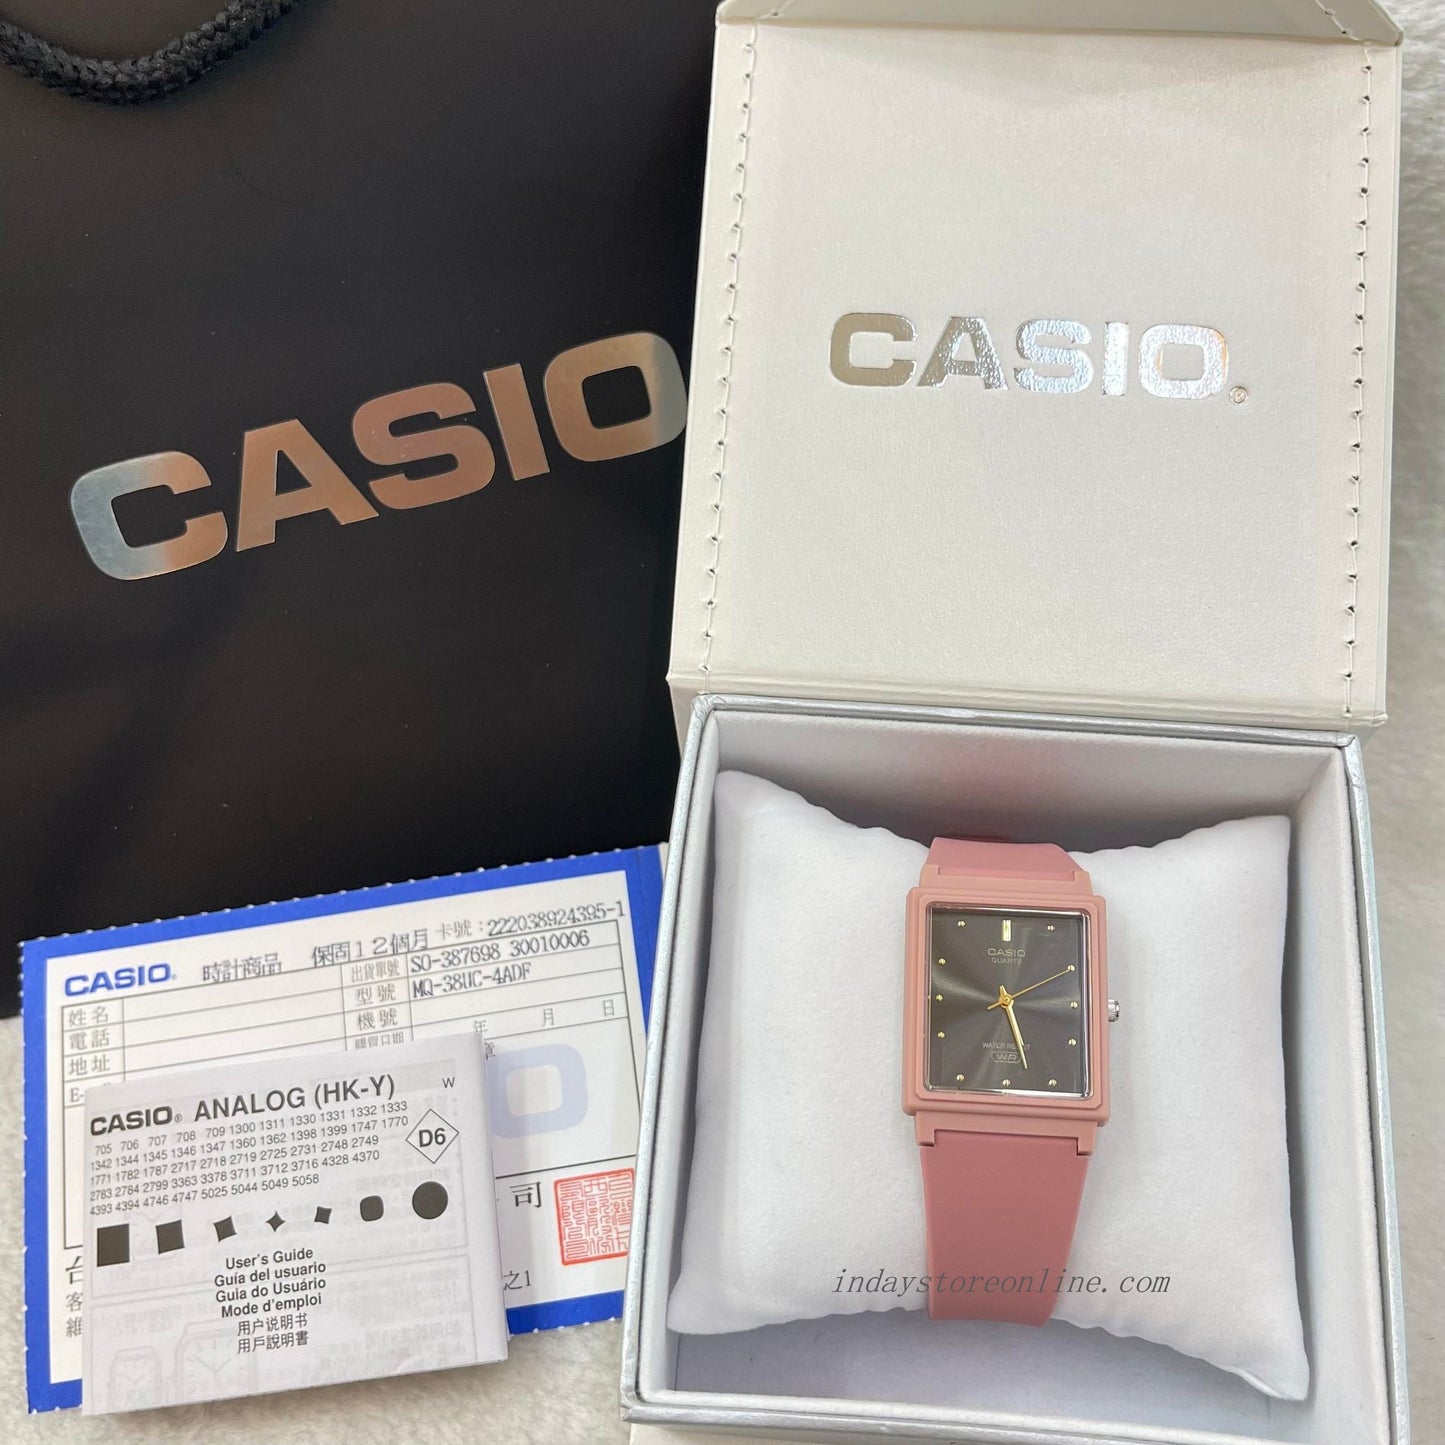 Casio Analog Women's Watch MQ-38UC-4A Resin Glass Pink Color Resin Strap Watch